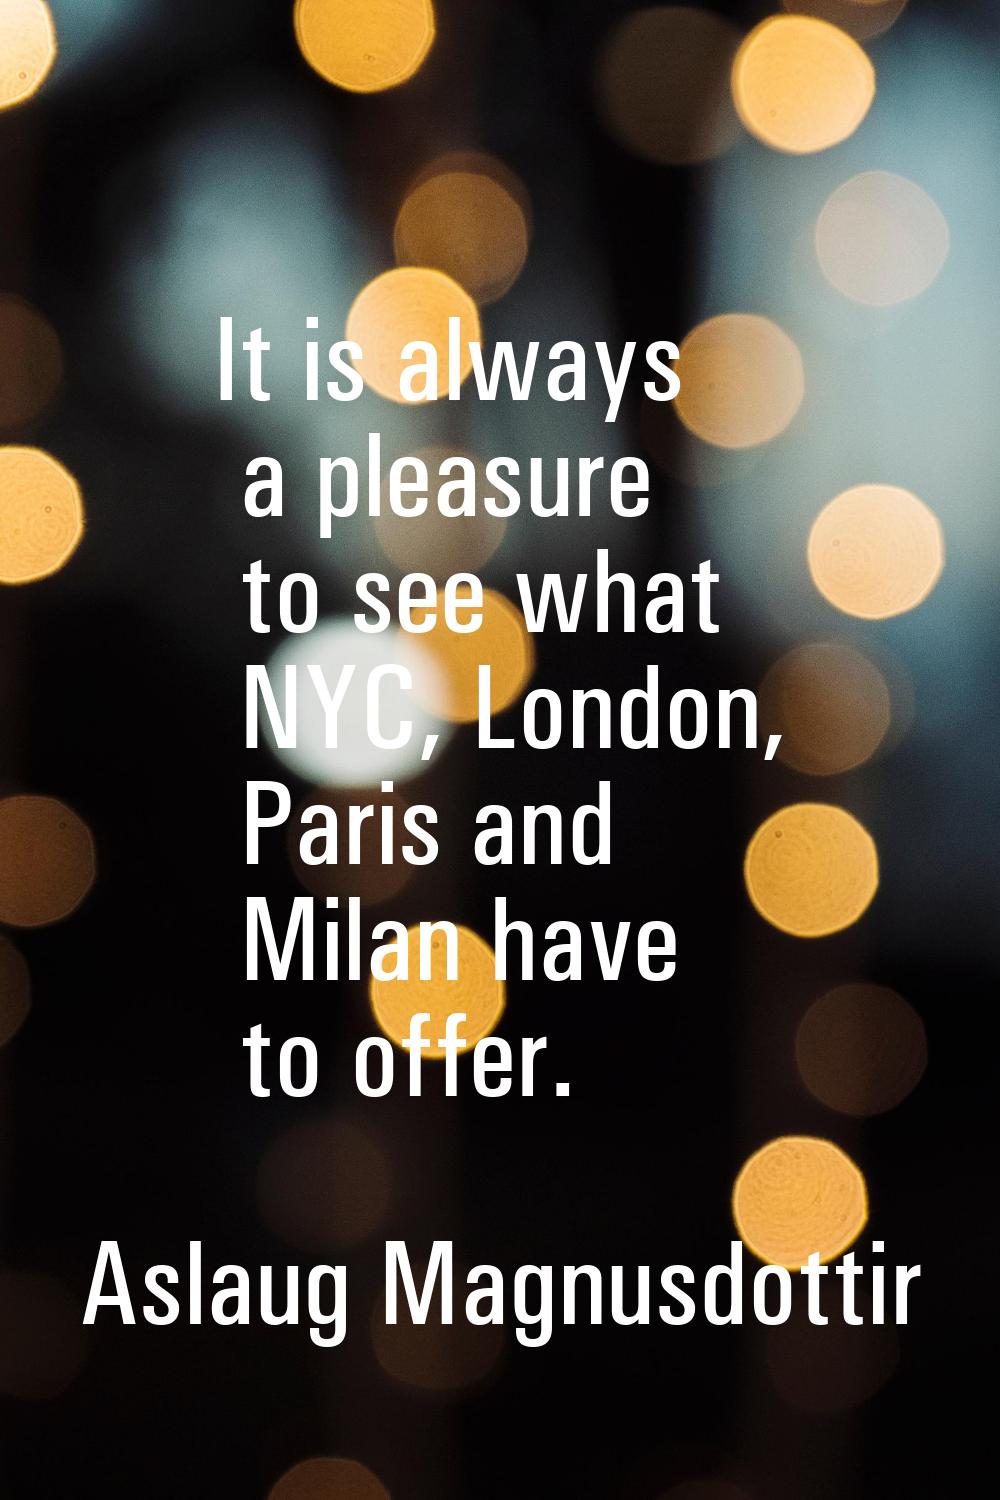 It is always a pleasure to see what NYC, London, Paris and Milan have to offer.